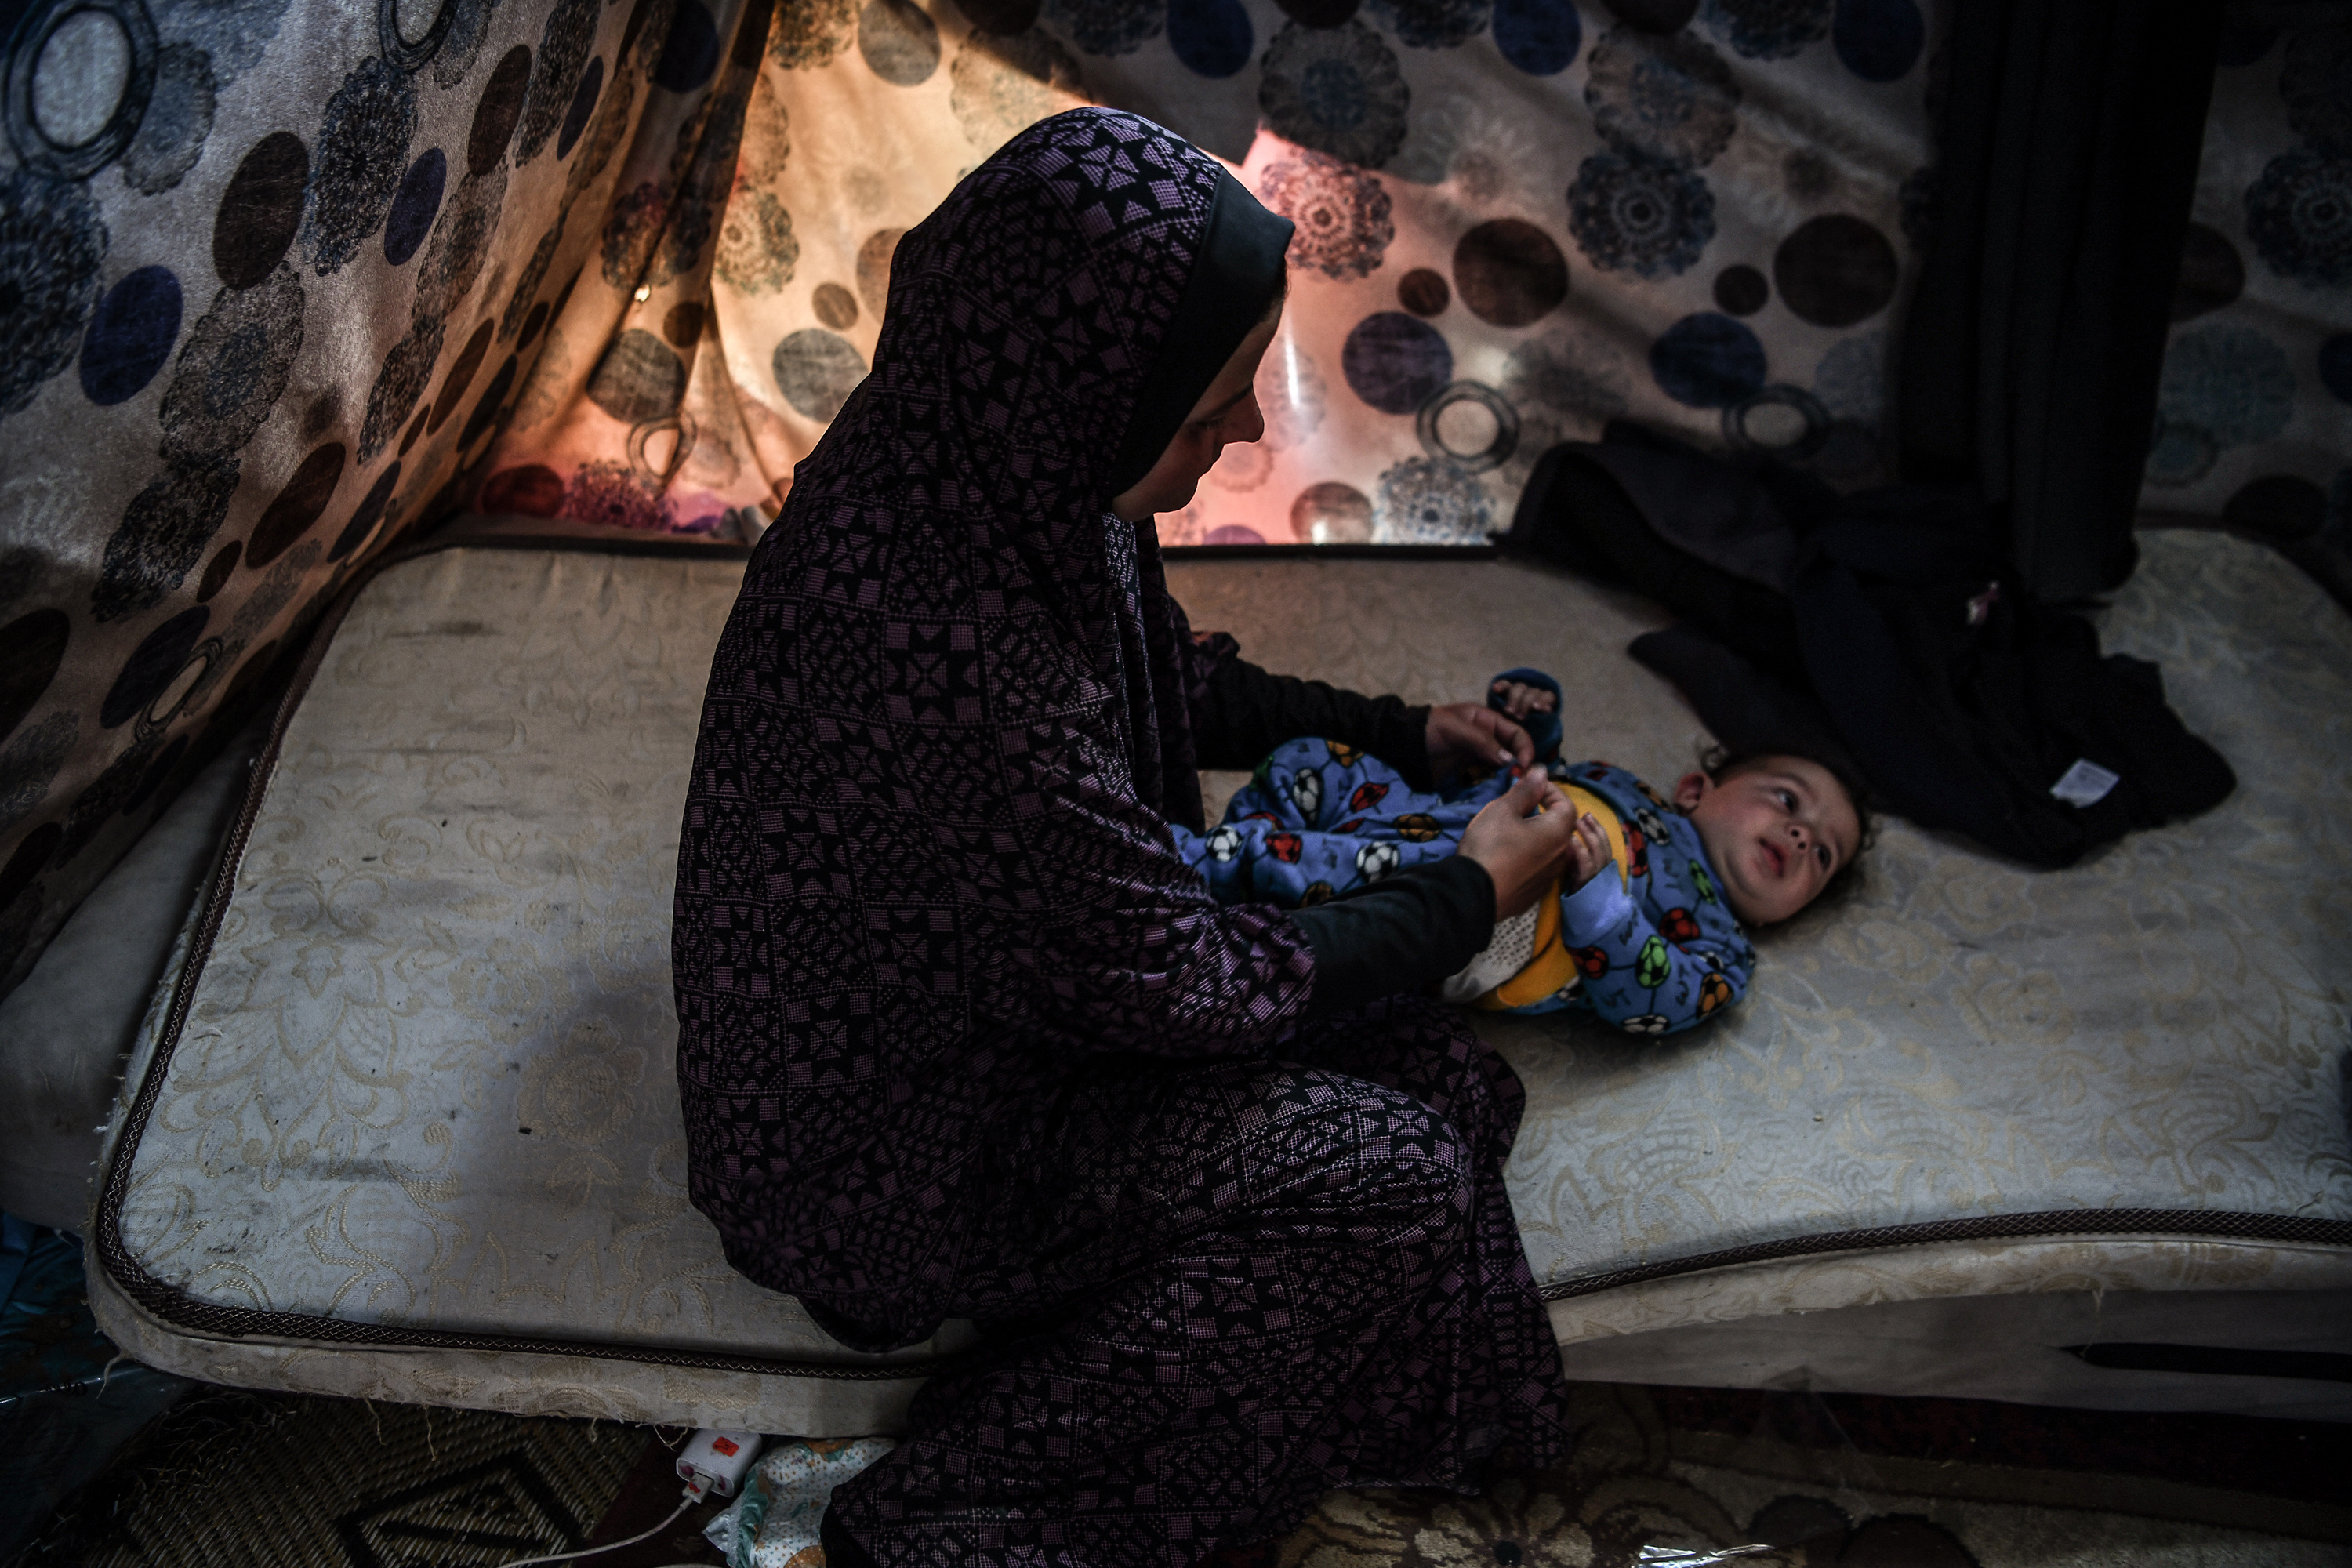 Feda al-Zahhar takes care of her 4-month-old baby as the family struggles to survive in a makeshift tent under difficult conditions on February 29. 